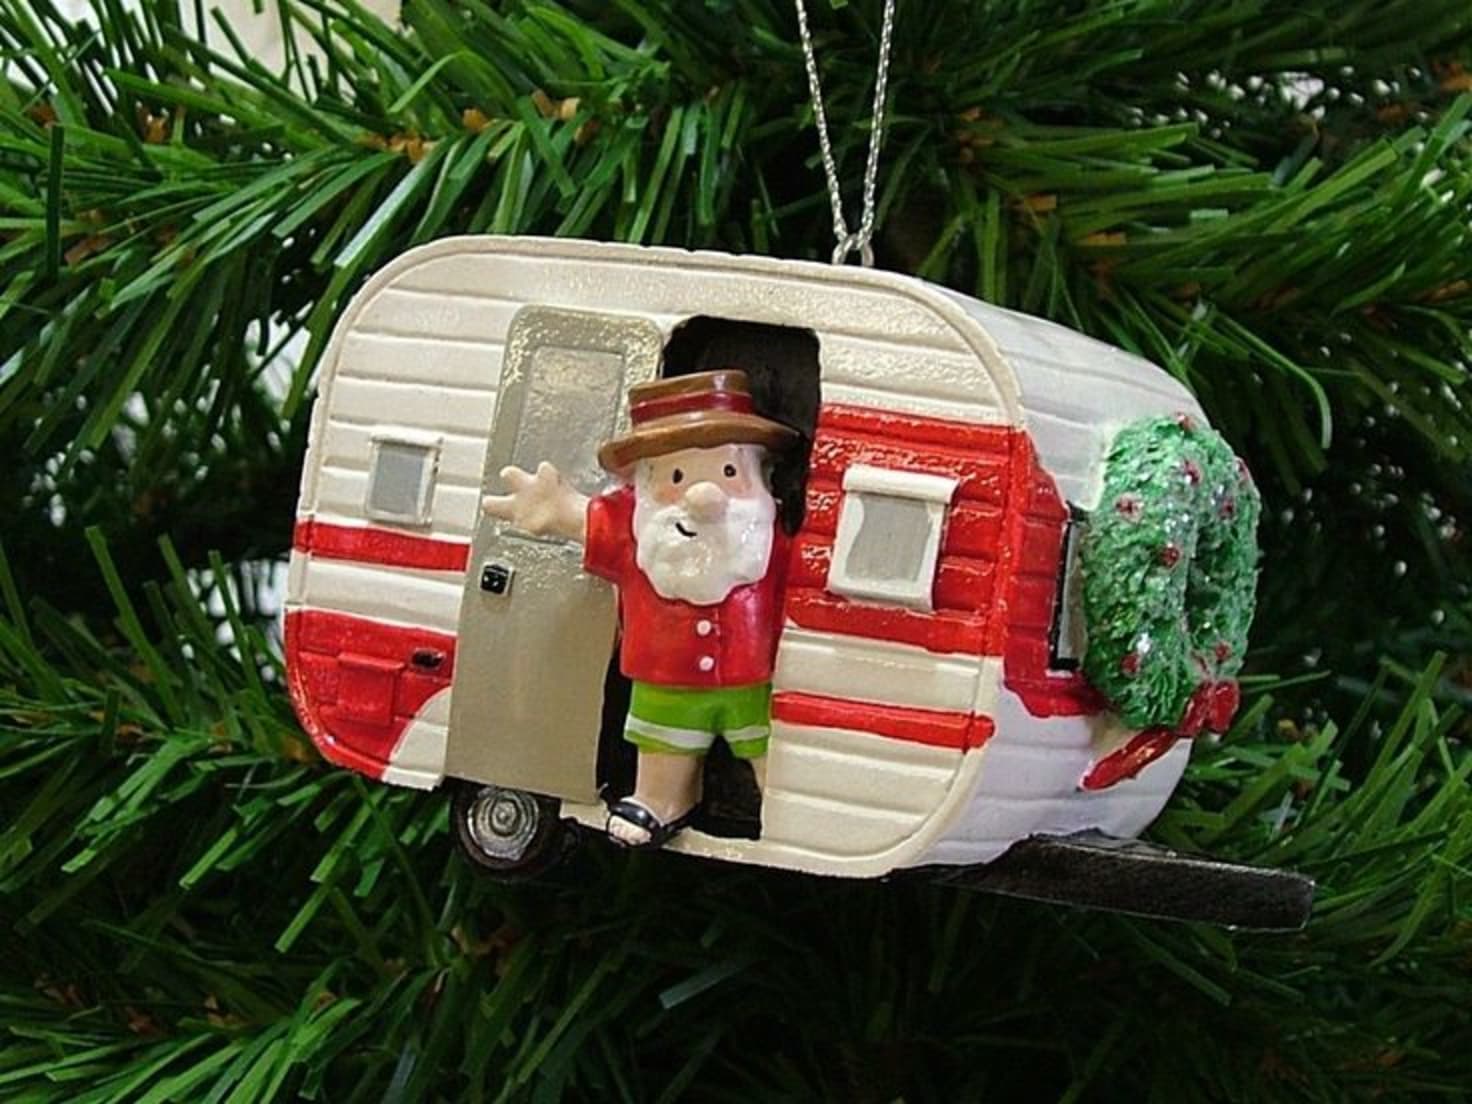 Camping-Themed Ornaments Every Tree Needs This Holiday Season